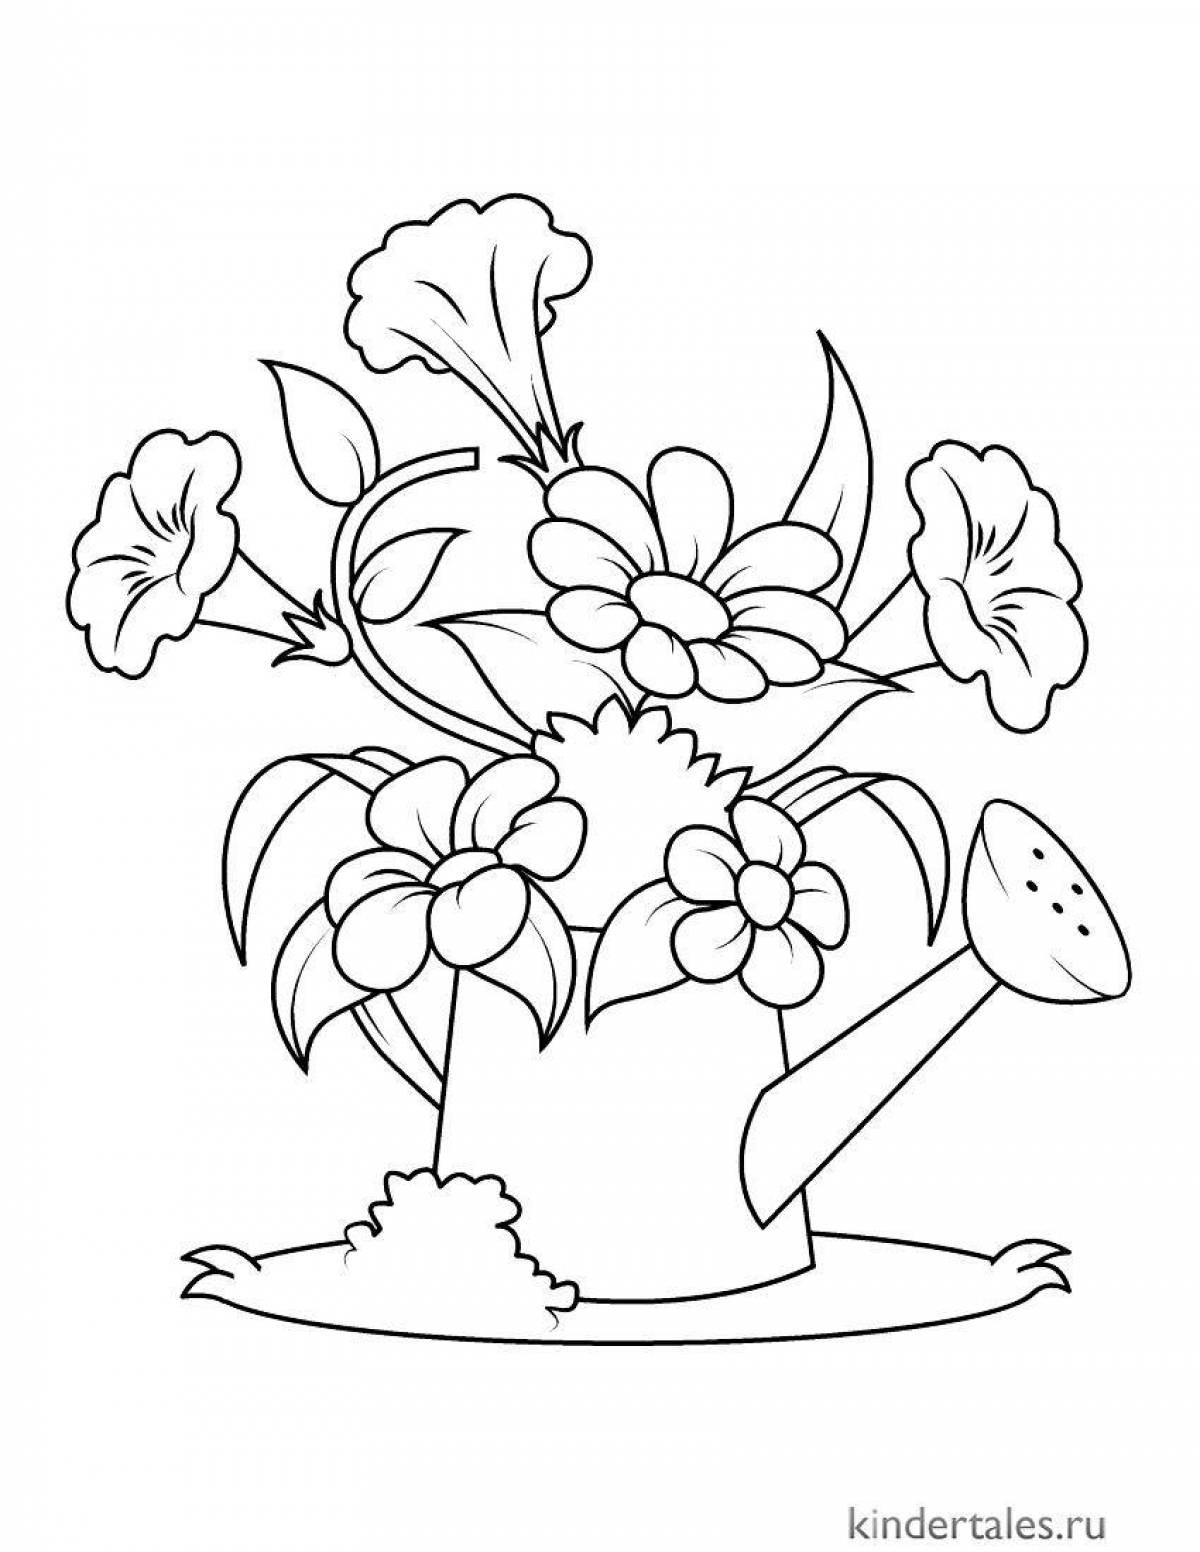 Playful flower coloring page for toddlers